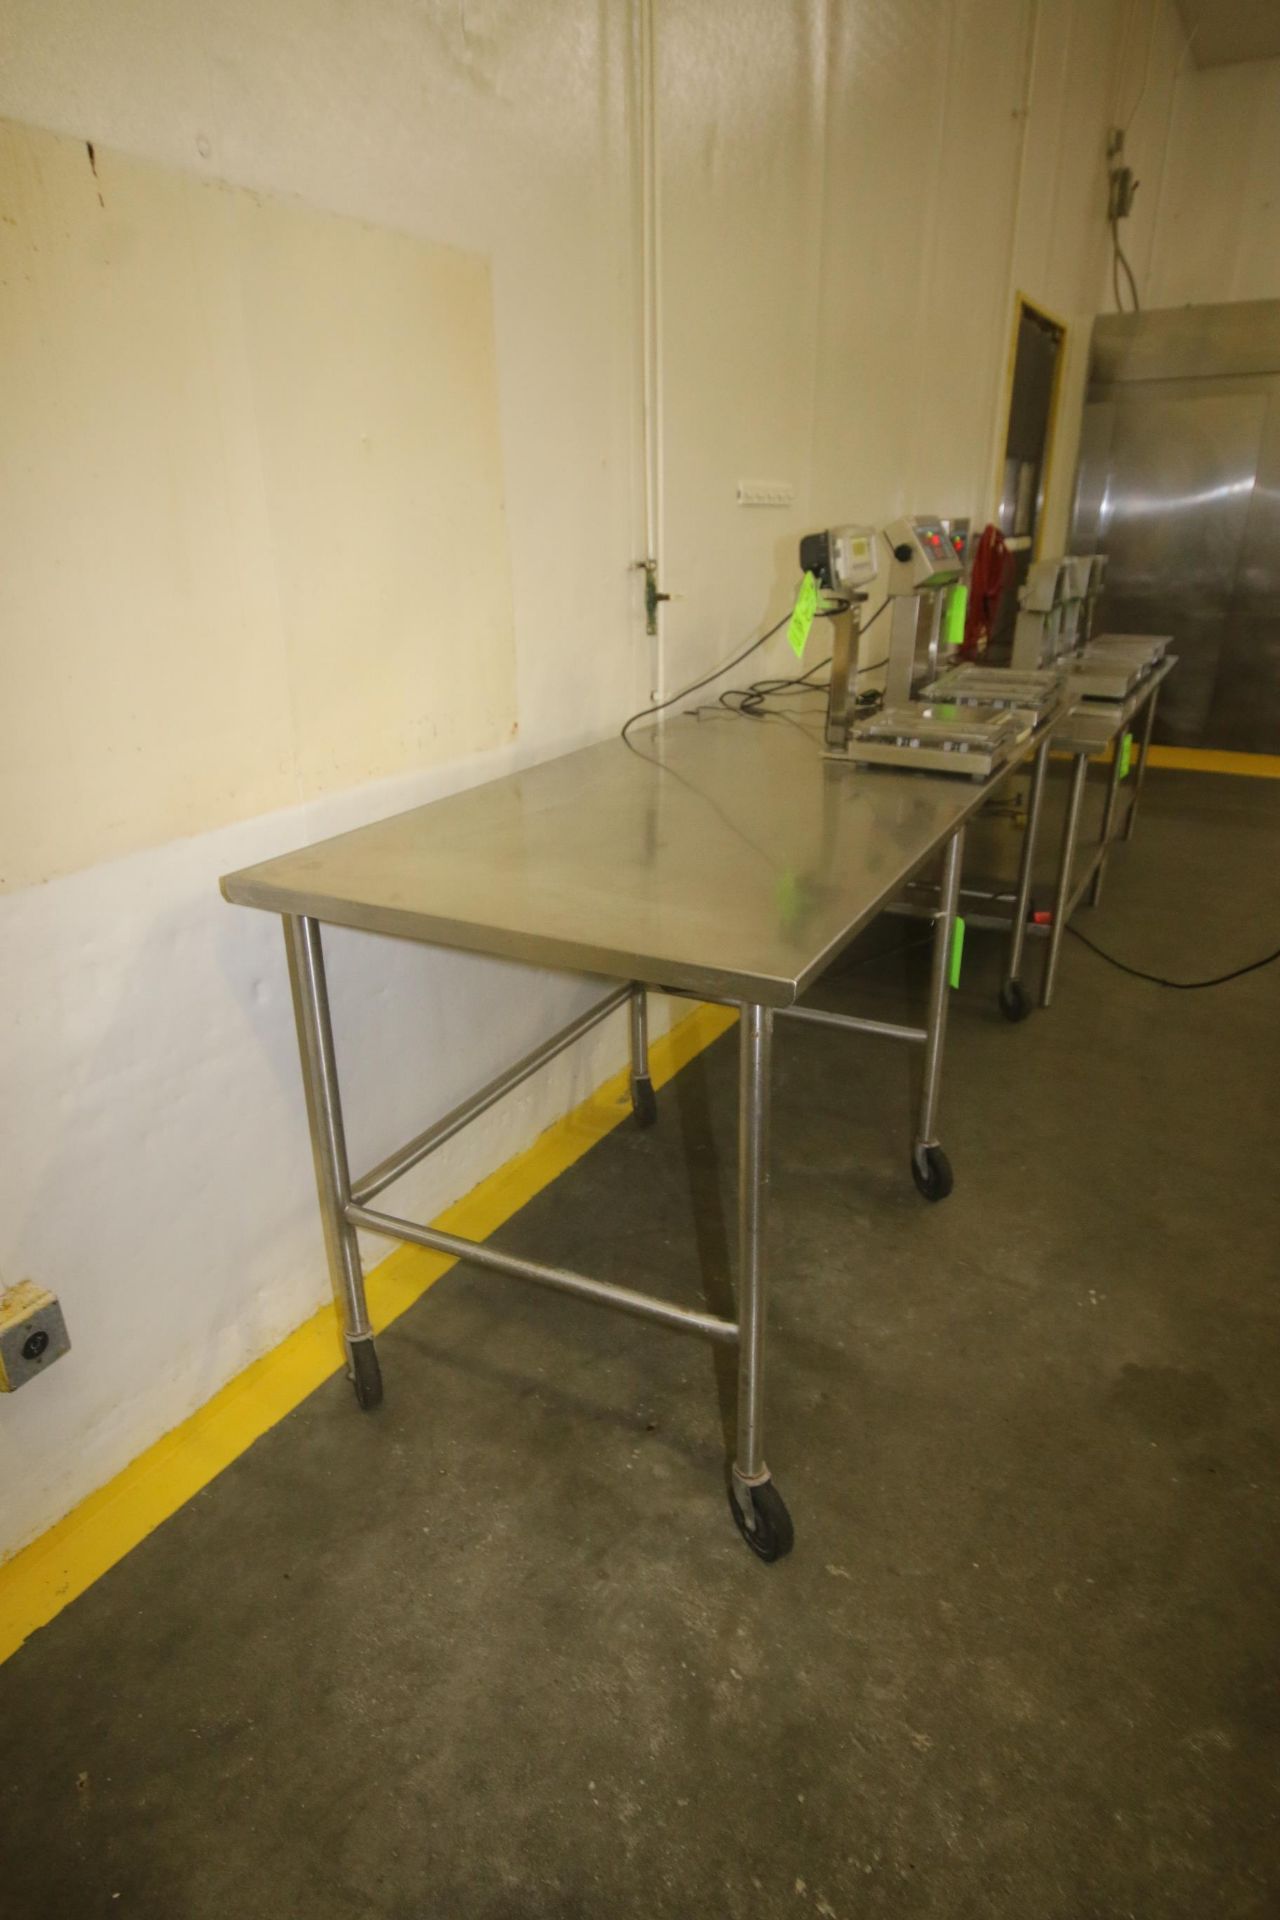 S/S Portable Table, Overall Dims.: Aprox. 96" L x 36" W x 40" H, Mounted on S/S Portable Frame ( - Image 3 of 3